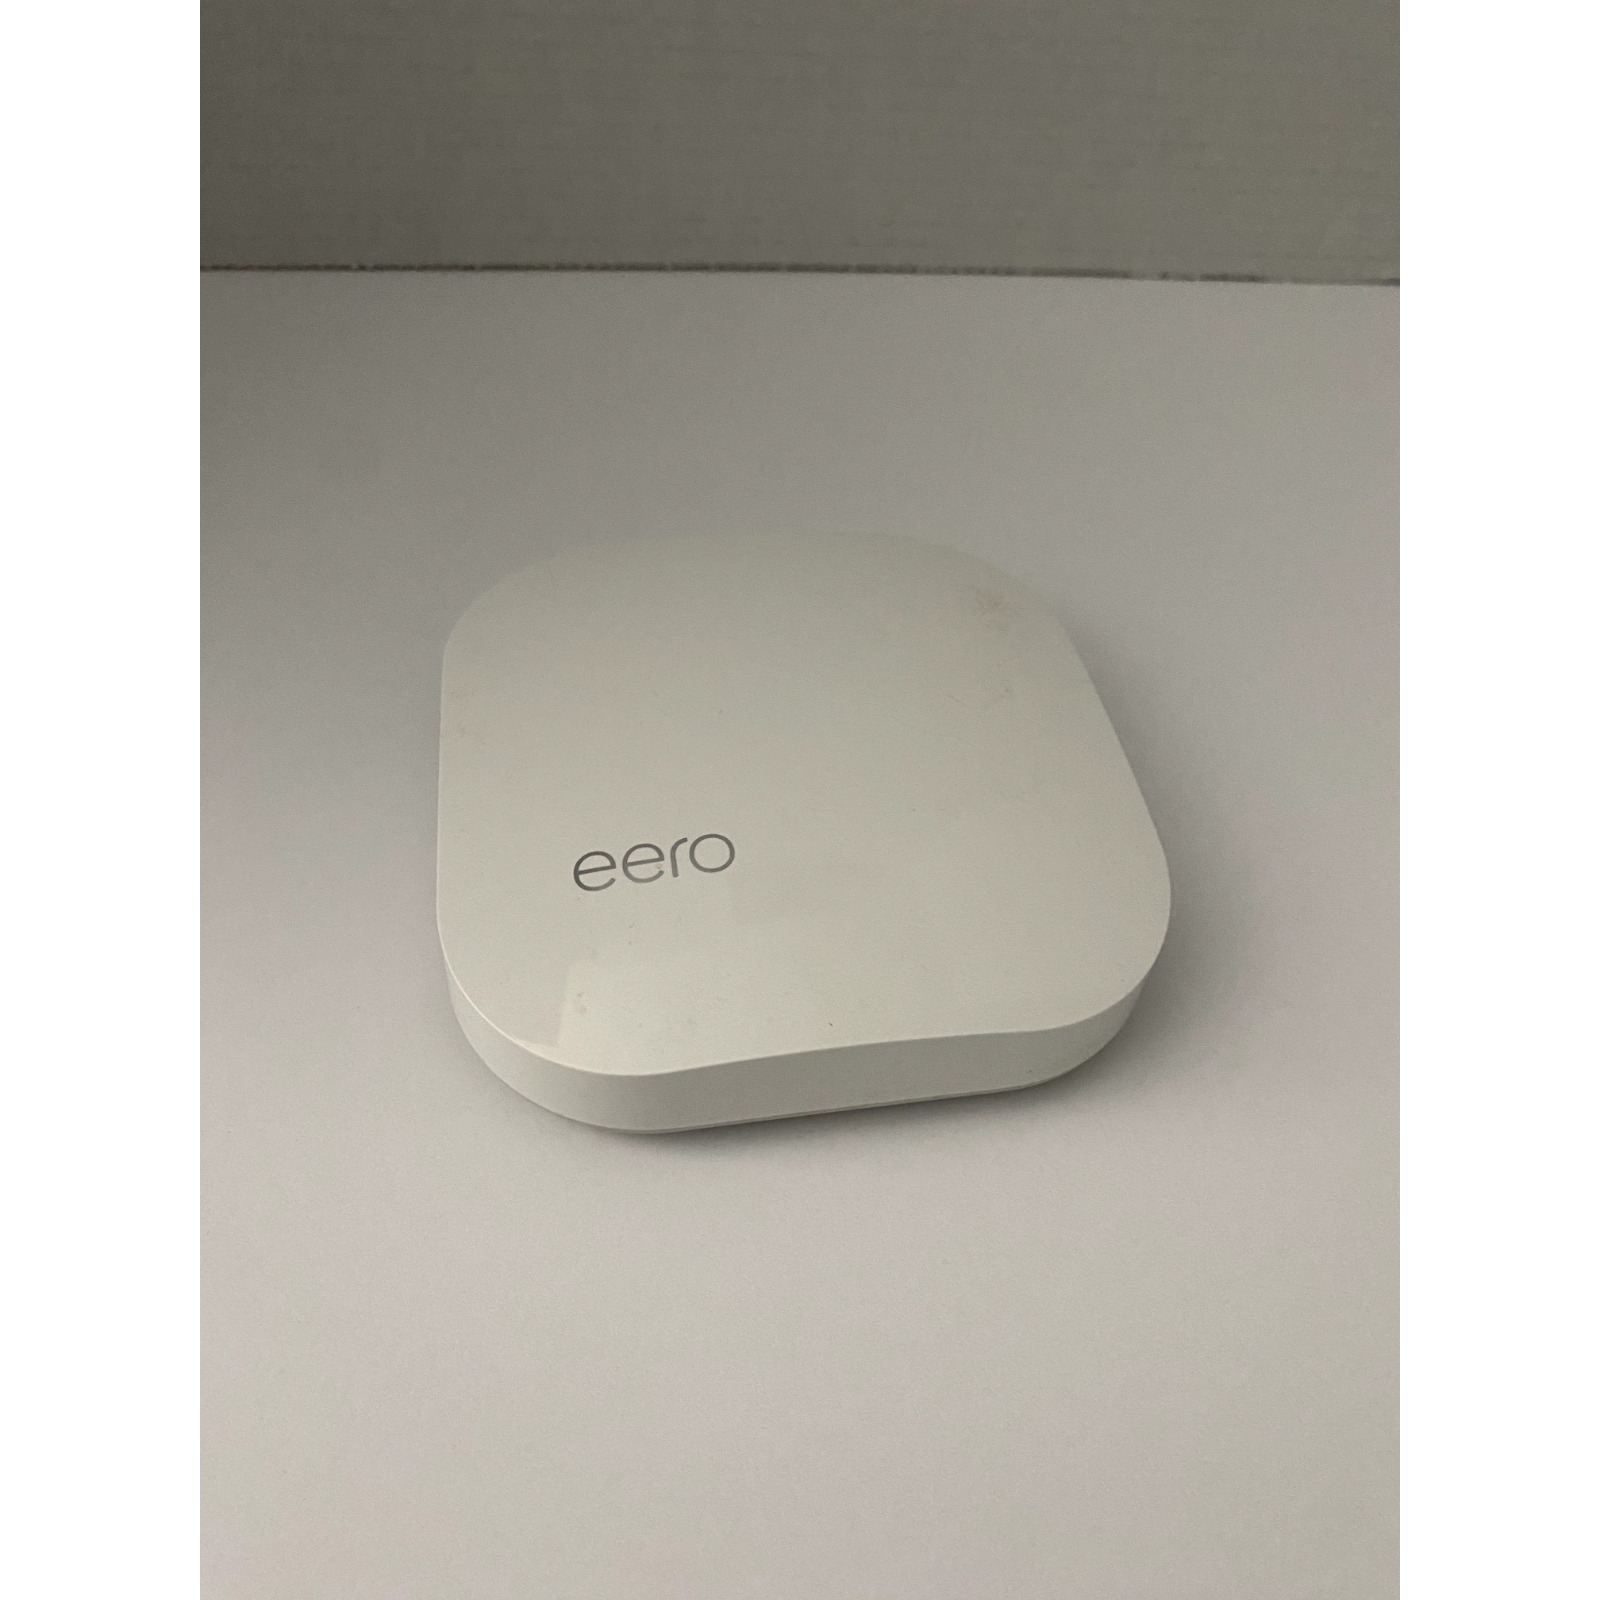 EERO 1st Generation Dual Band Wi-Fi Router without Power Cable